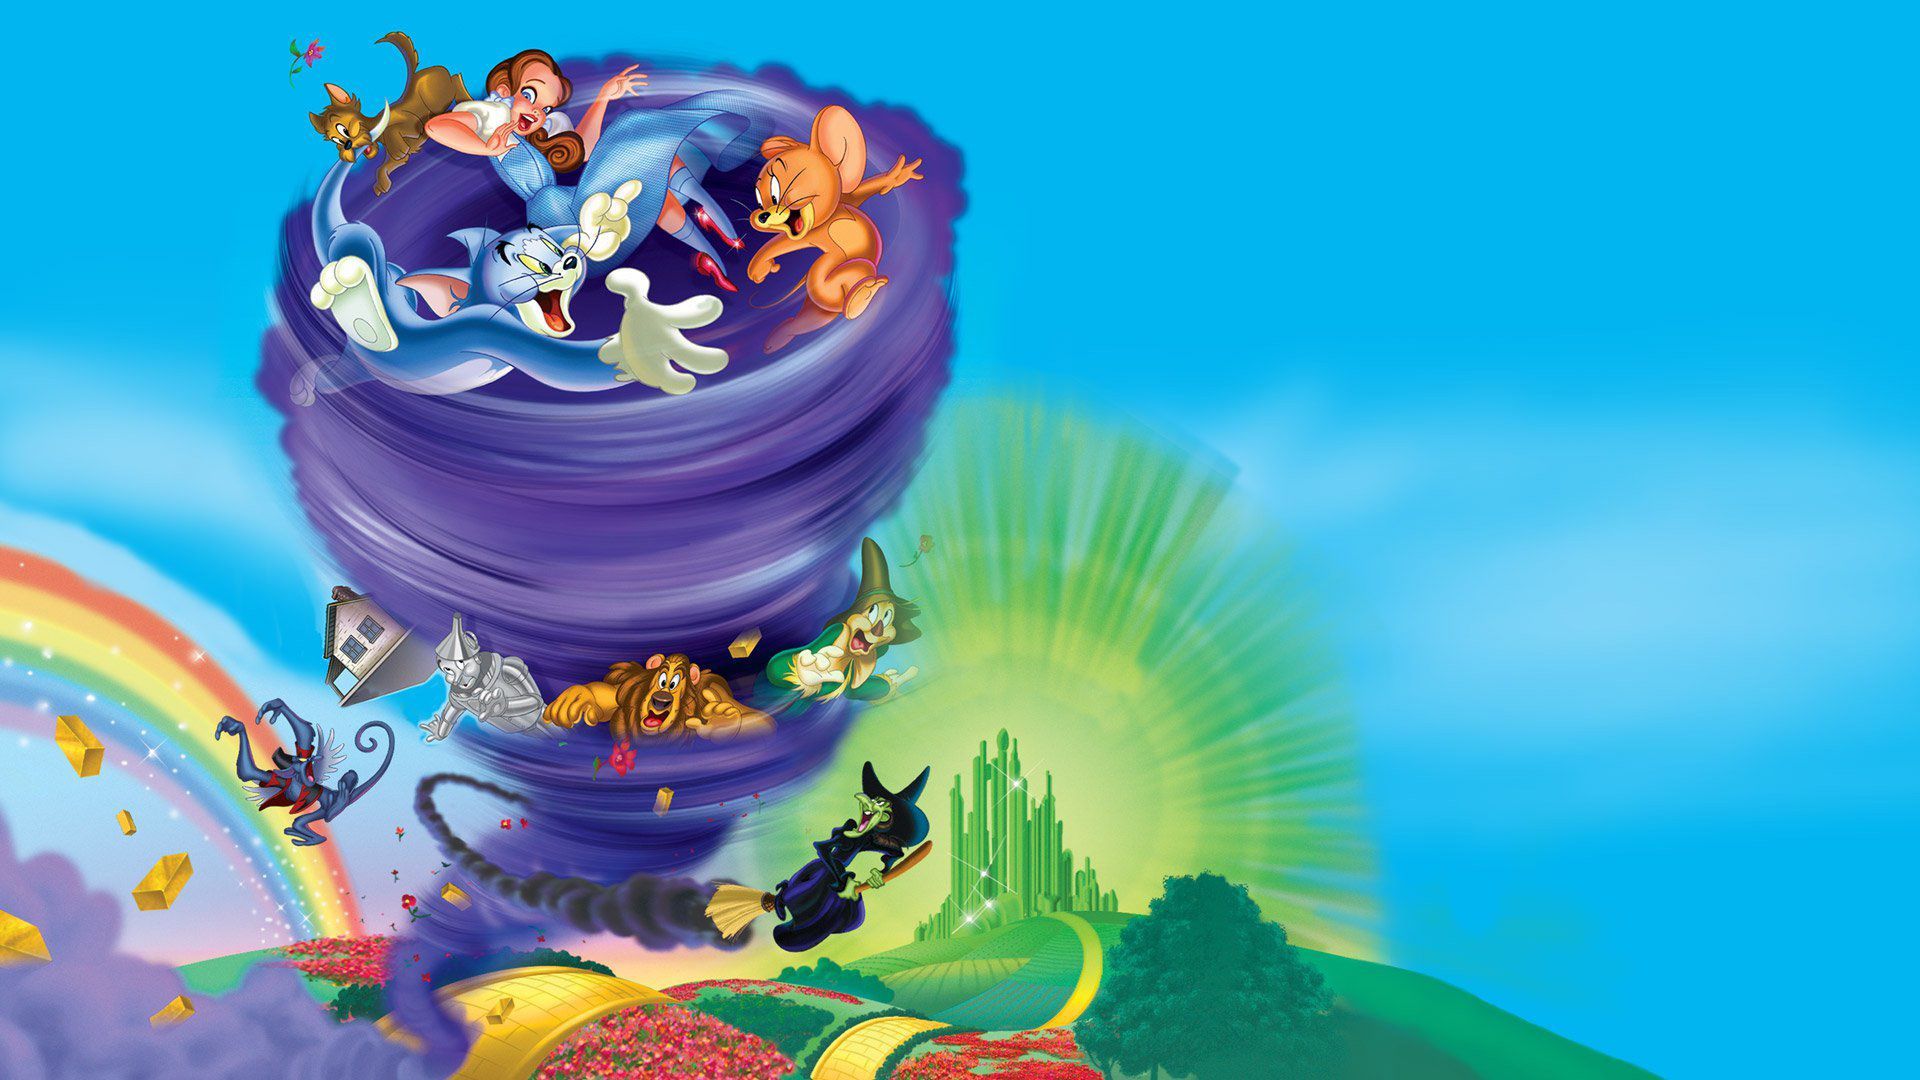 Tom and Jerry & The Wizard of Oz background